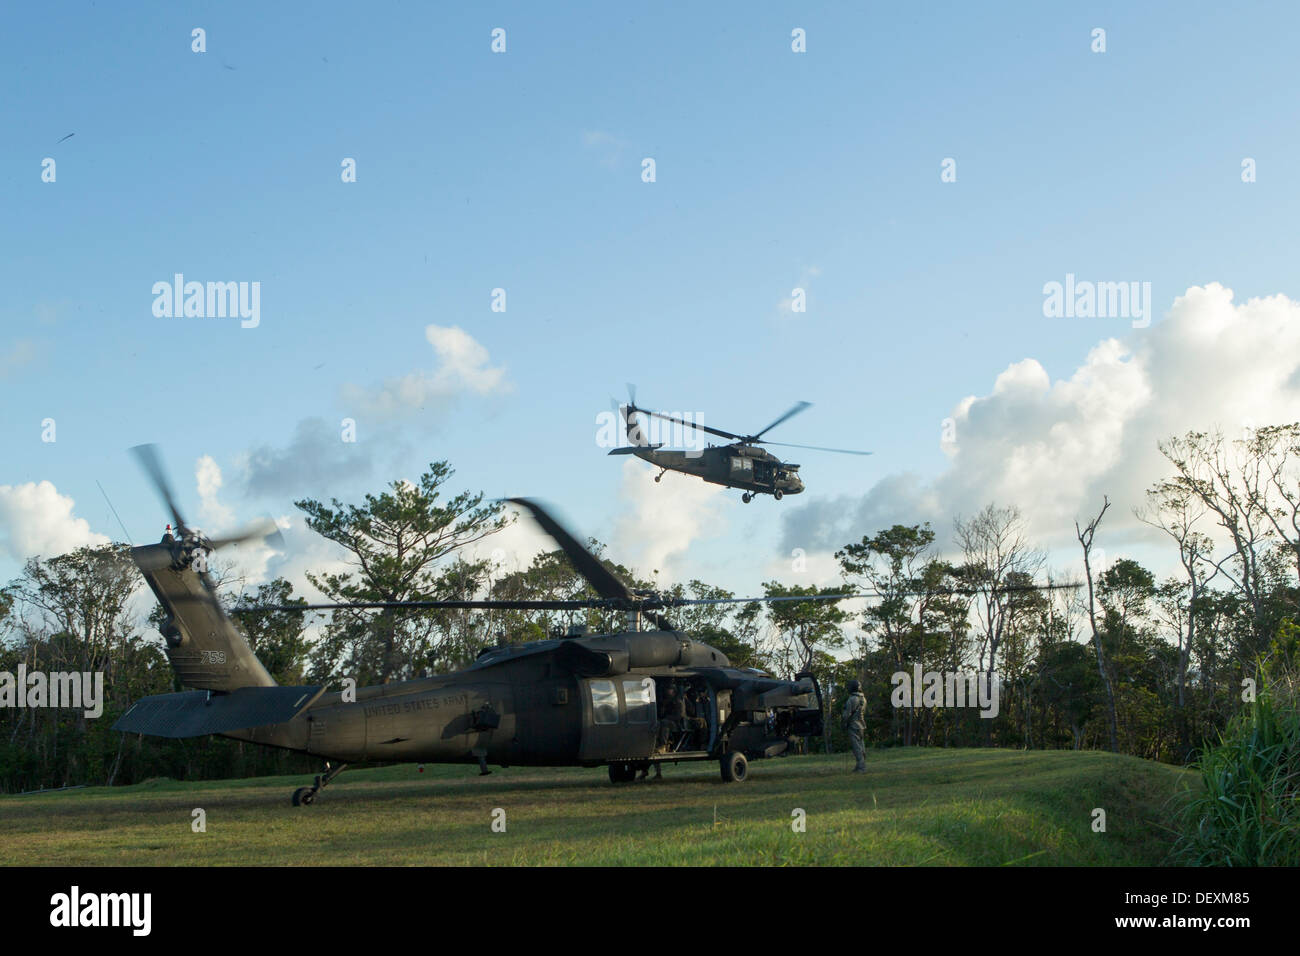 A U.S. Army UH-60 Black Hawk helicopter takes off carrying Marines to an objective Sept. 12 at Camp Schwab as part of the Exercise Lejeune II joint aerial assault training. Soldiers and Marines joined together for this training exercise to gain proficienc Stock Photo